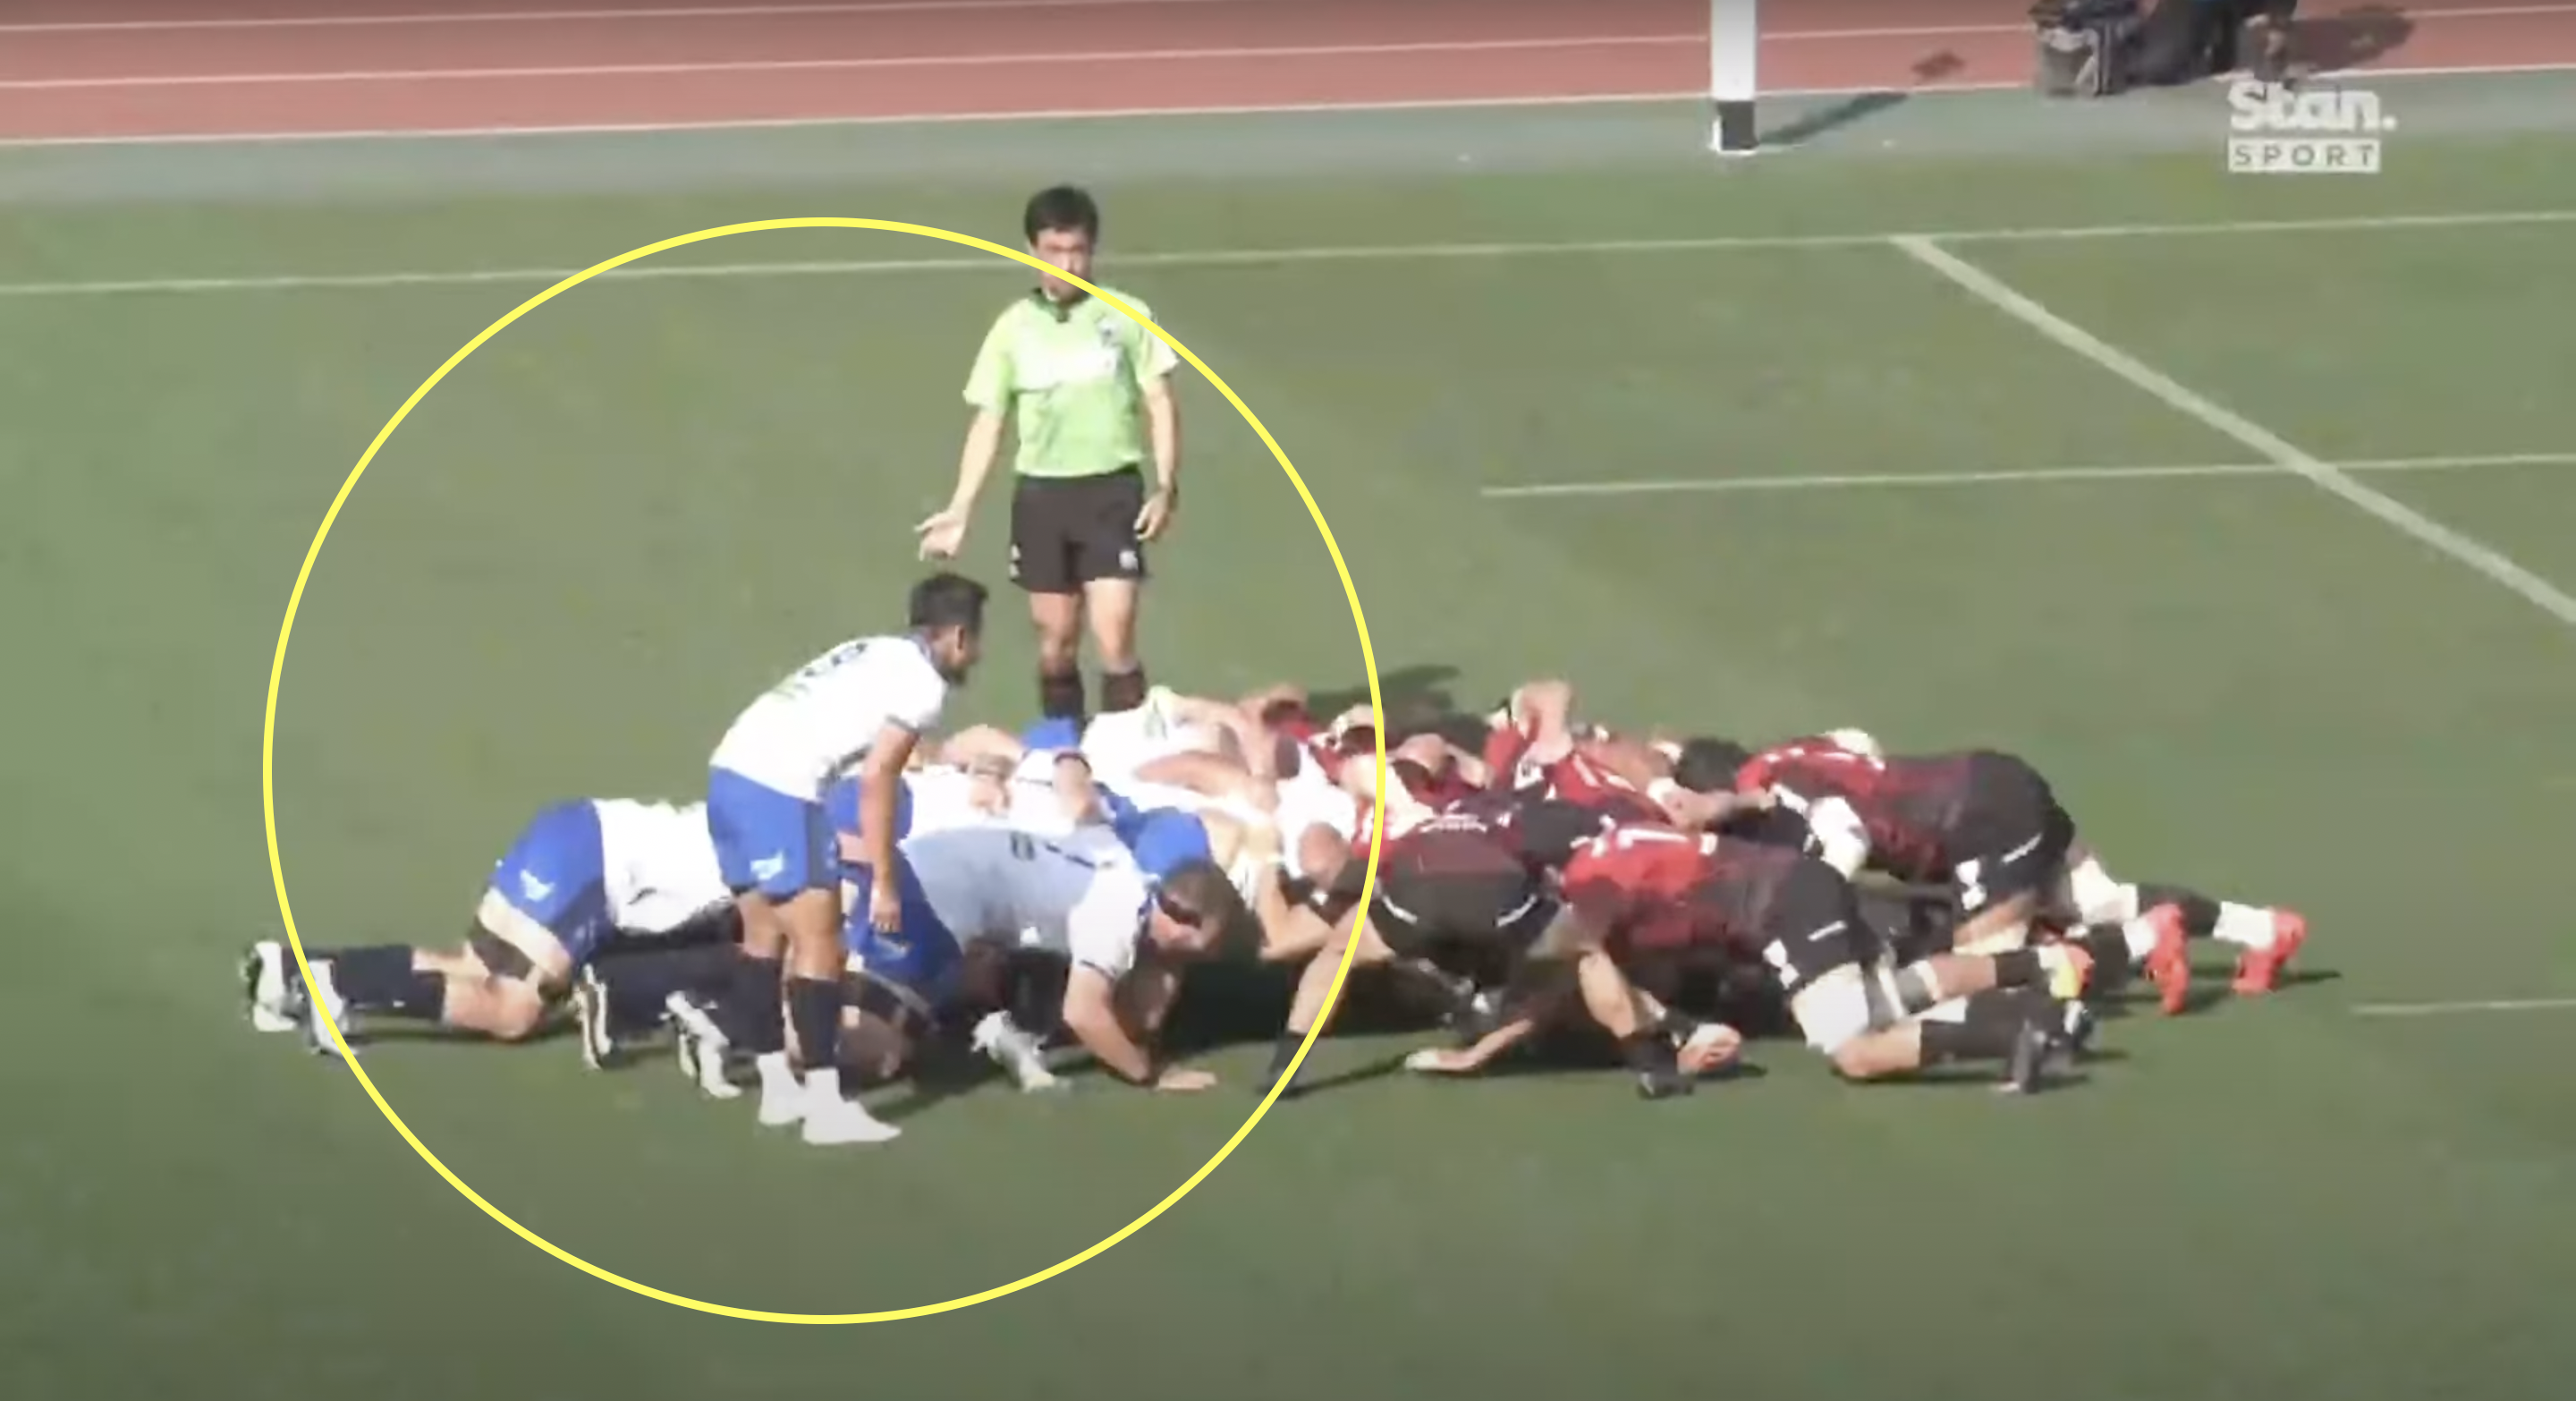 This could be the most dominant scrum in history